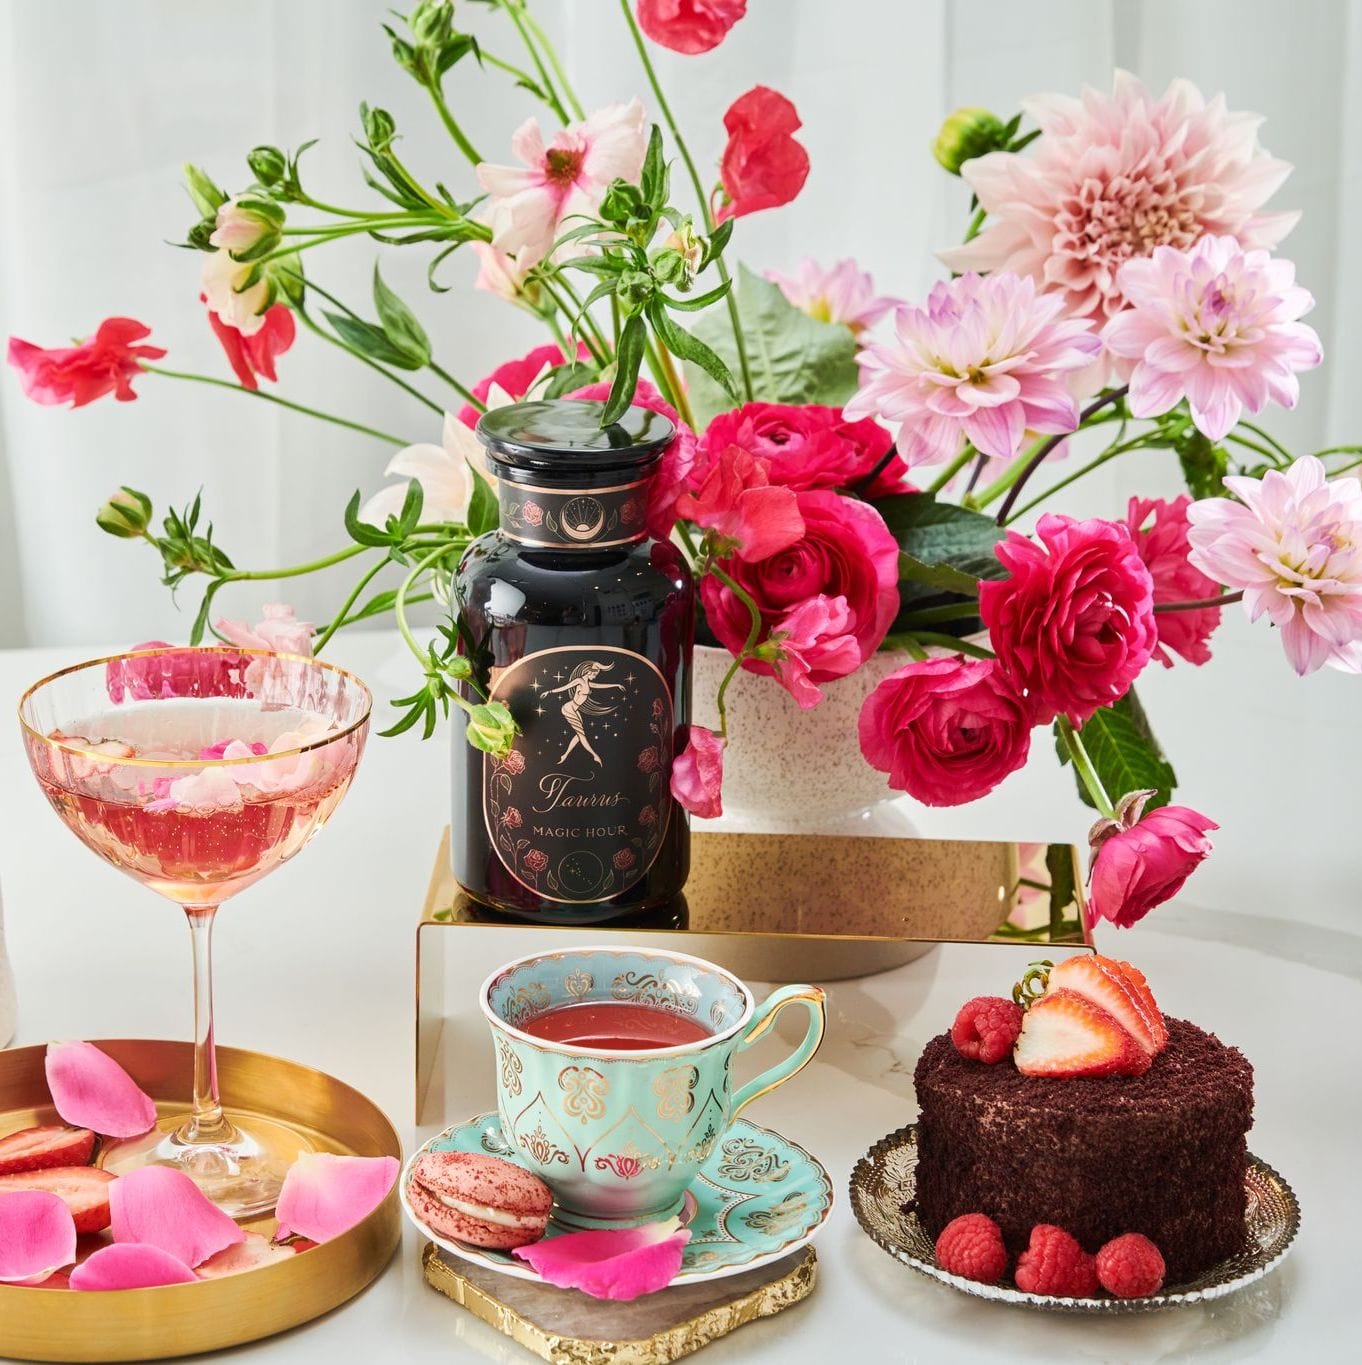 A beautifully arranged table featuring a bouquet of pink and red flowers, a glass of pink beverage with rose petals, a turquoise teacup filled with Magic Hour Taurus: Tea of Venusian Garden Delights and its matching saucer, a pink macaron, a small chocolate cake garnished with strawberries and raspberries, and a bottle labeled "Glamour Magic Rocks.